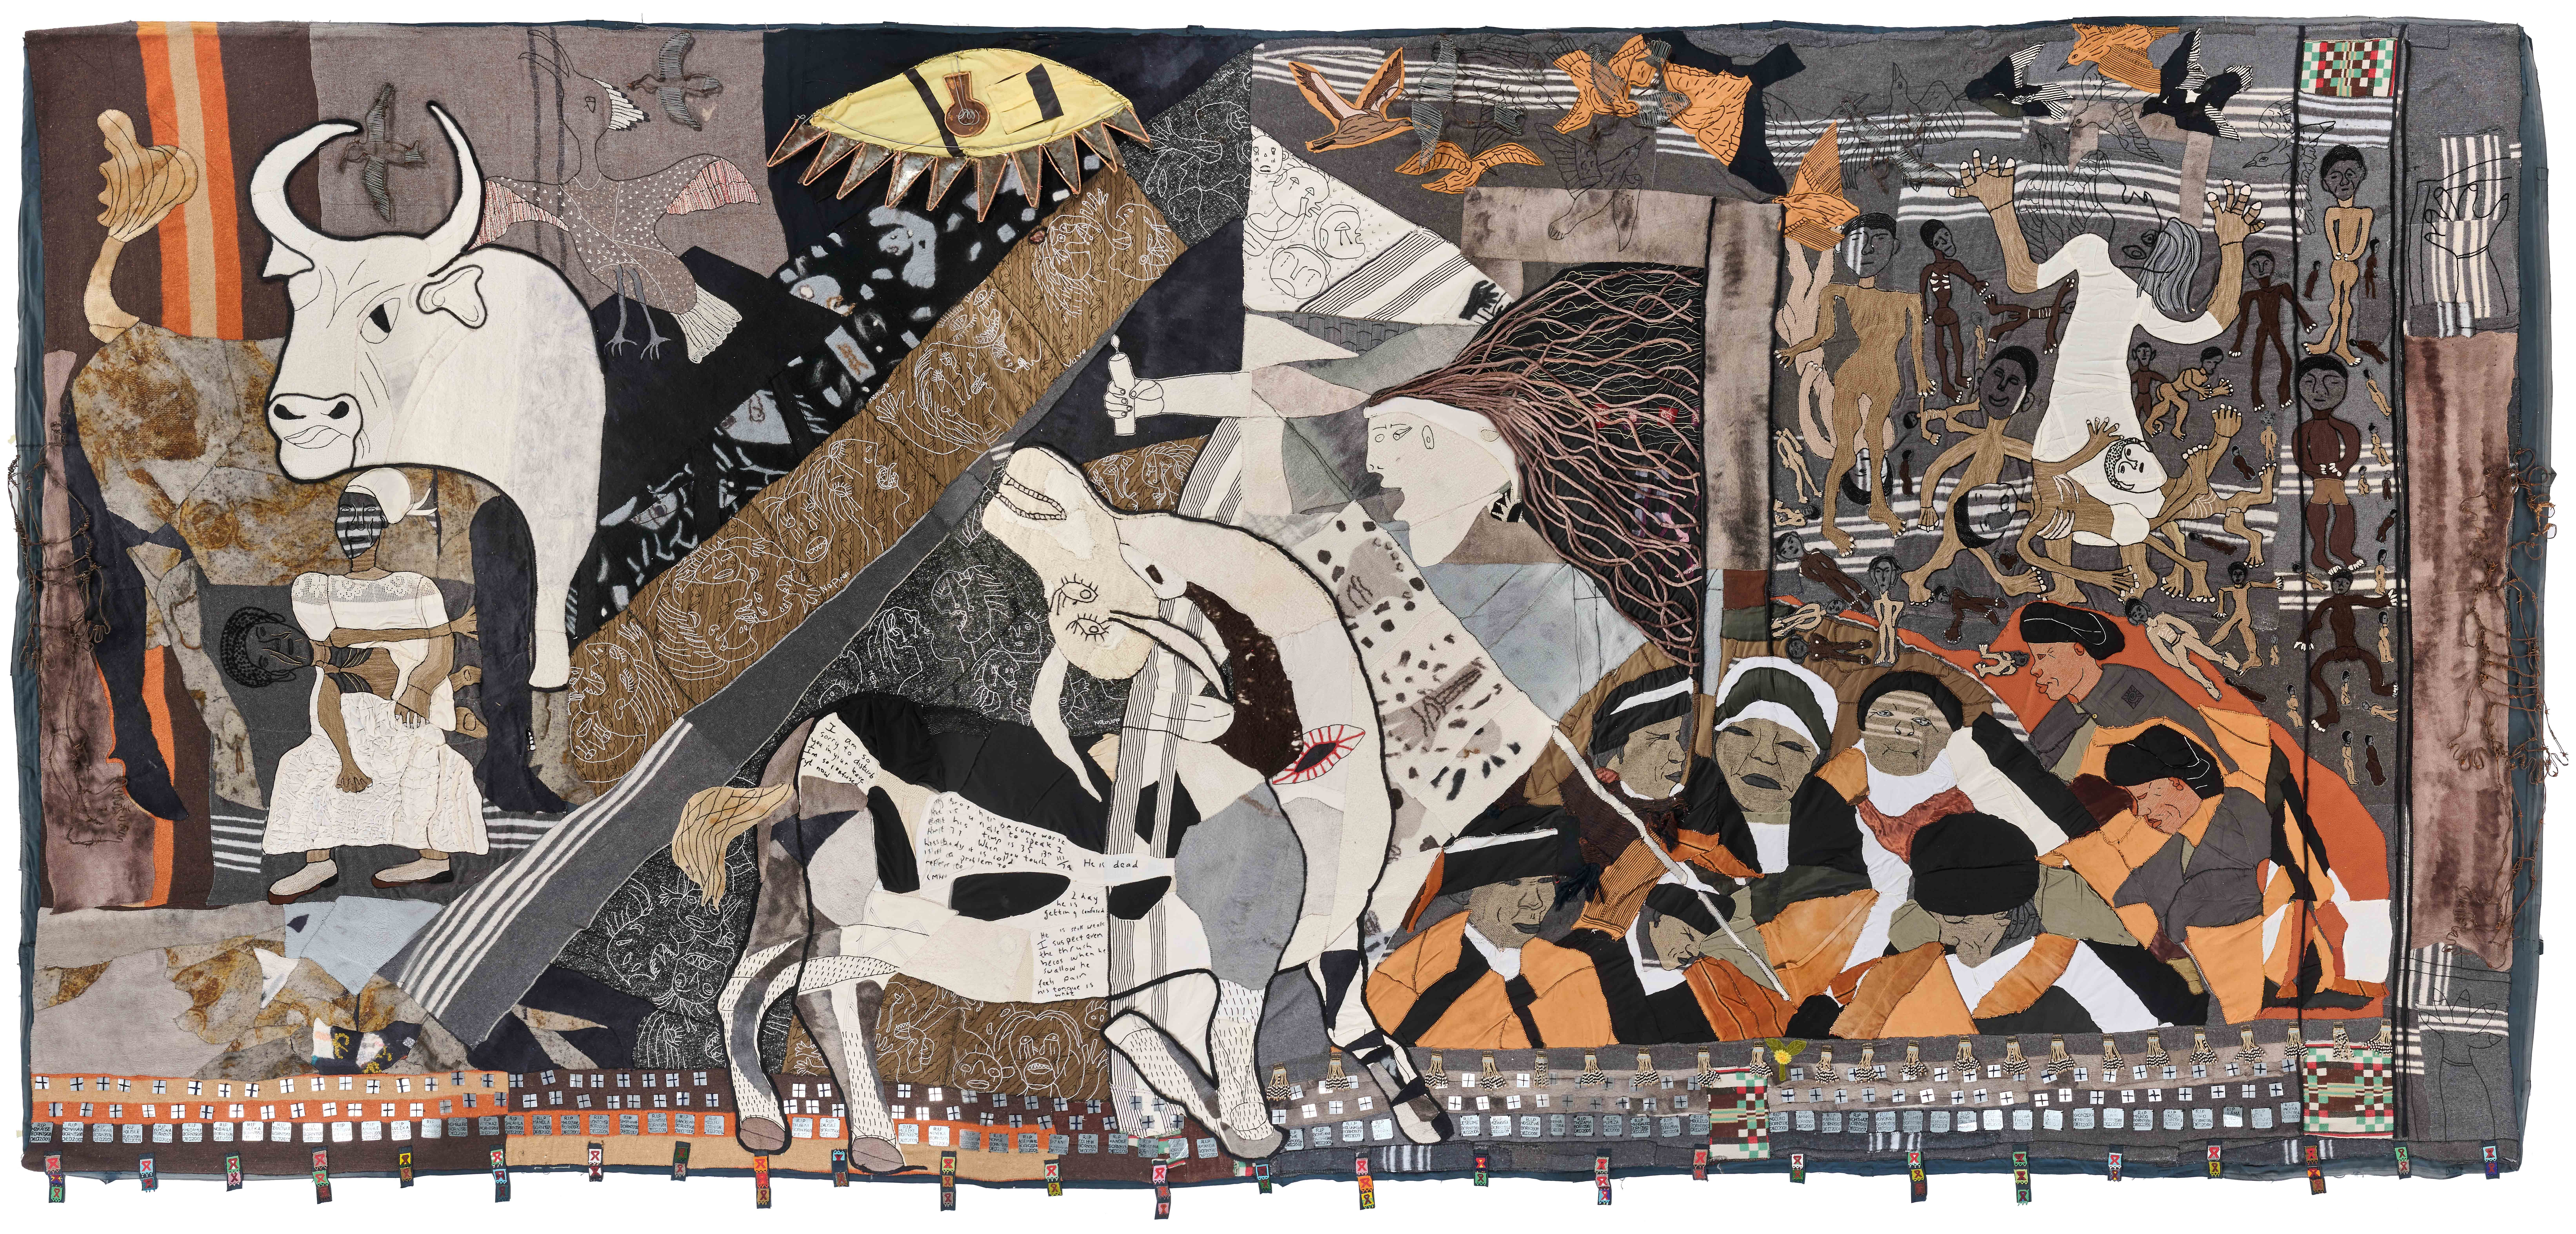 The 2010 Guernica by the Keiskamma Art Projects. Image: Keiskamma Art Projects